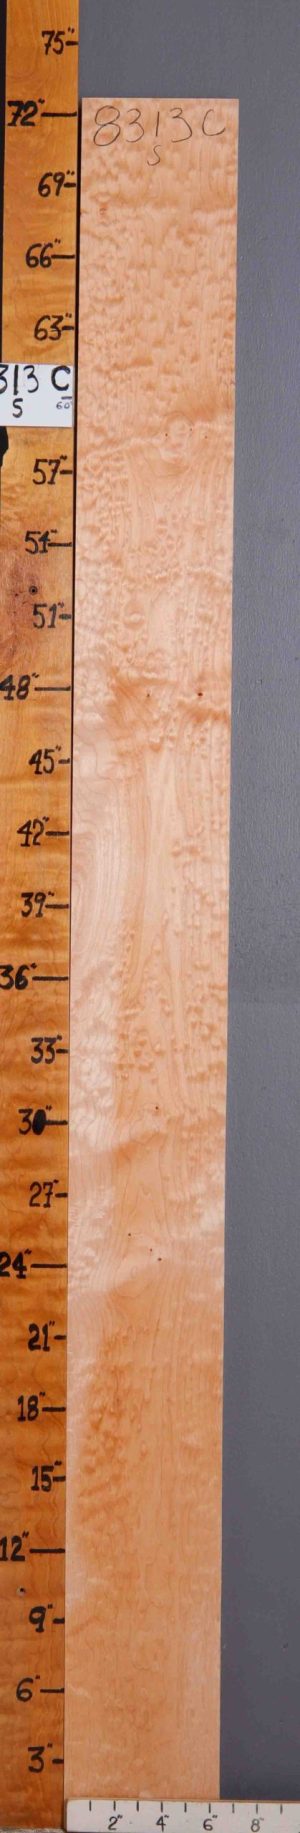 5A Quilted Maple Lumber 6"2/4 X 73" X 4/4 (NWT-8313C)